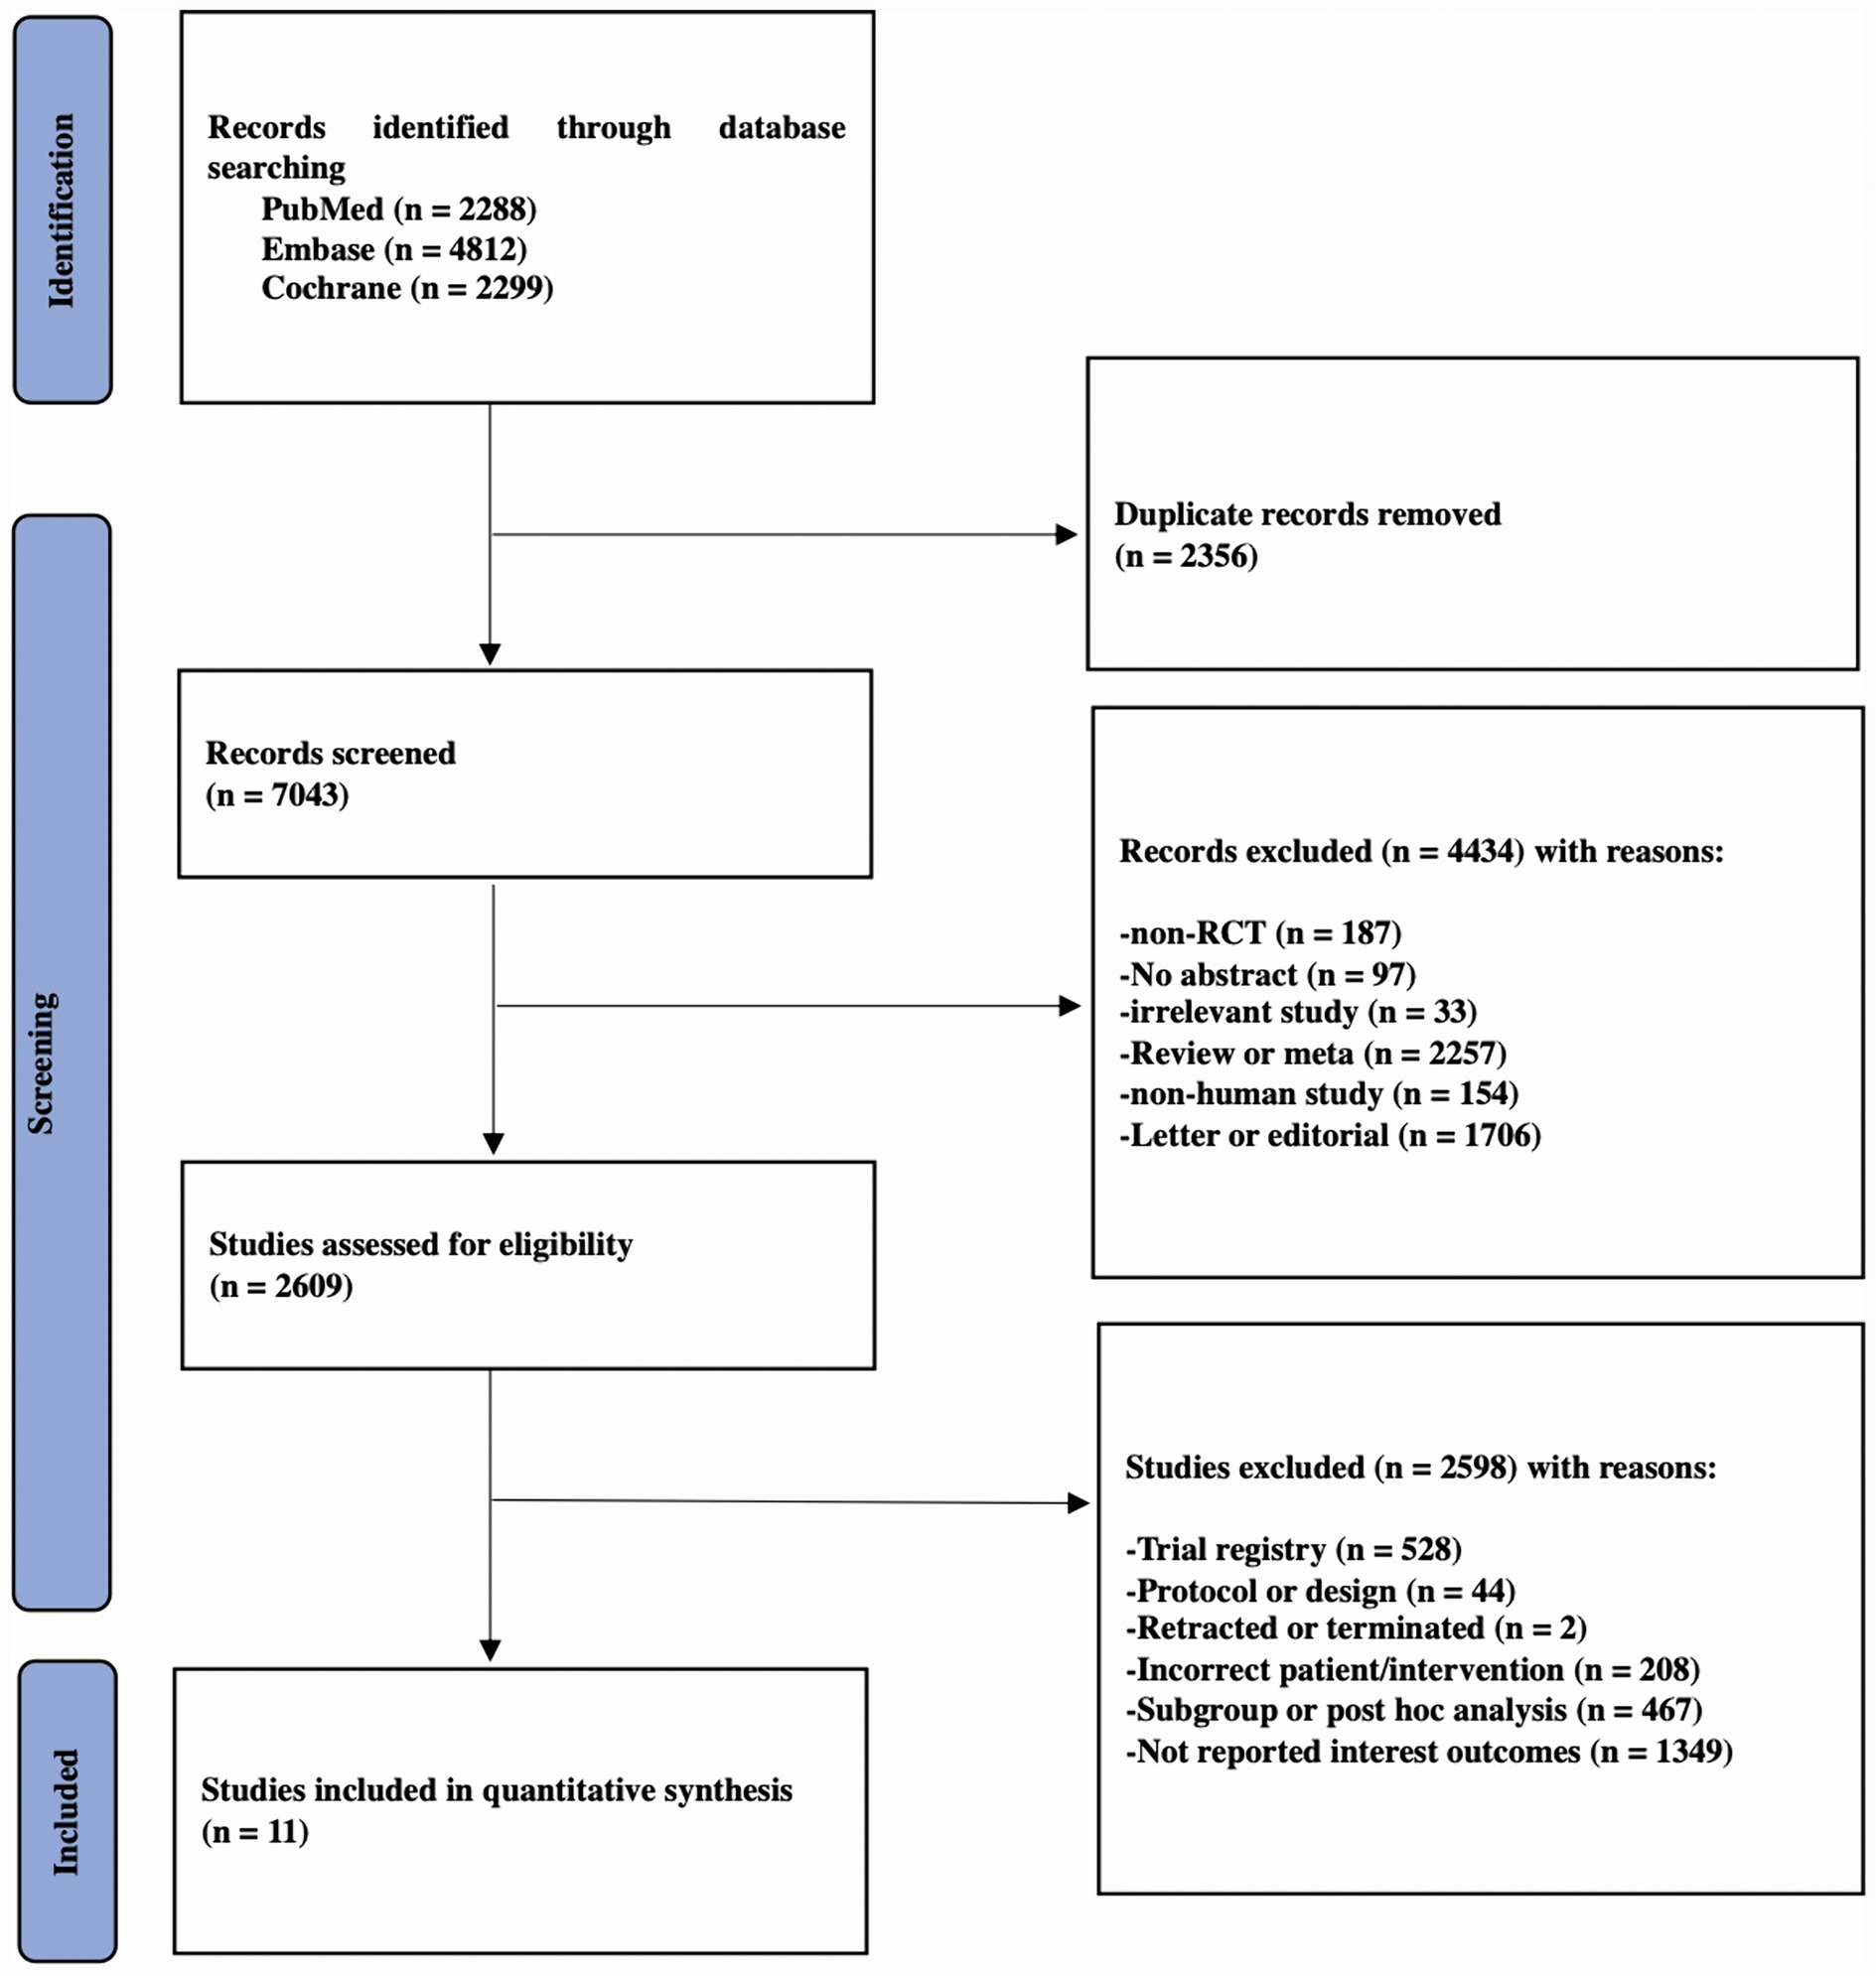 Effect of dipeptidyl peptidase-4 inhibitors on tumor necrosis factor alpha levels in patients with type 2 diabetes mellitus